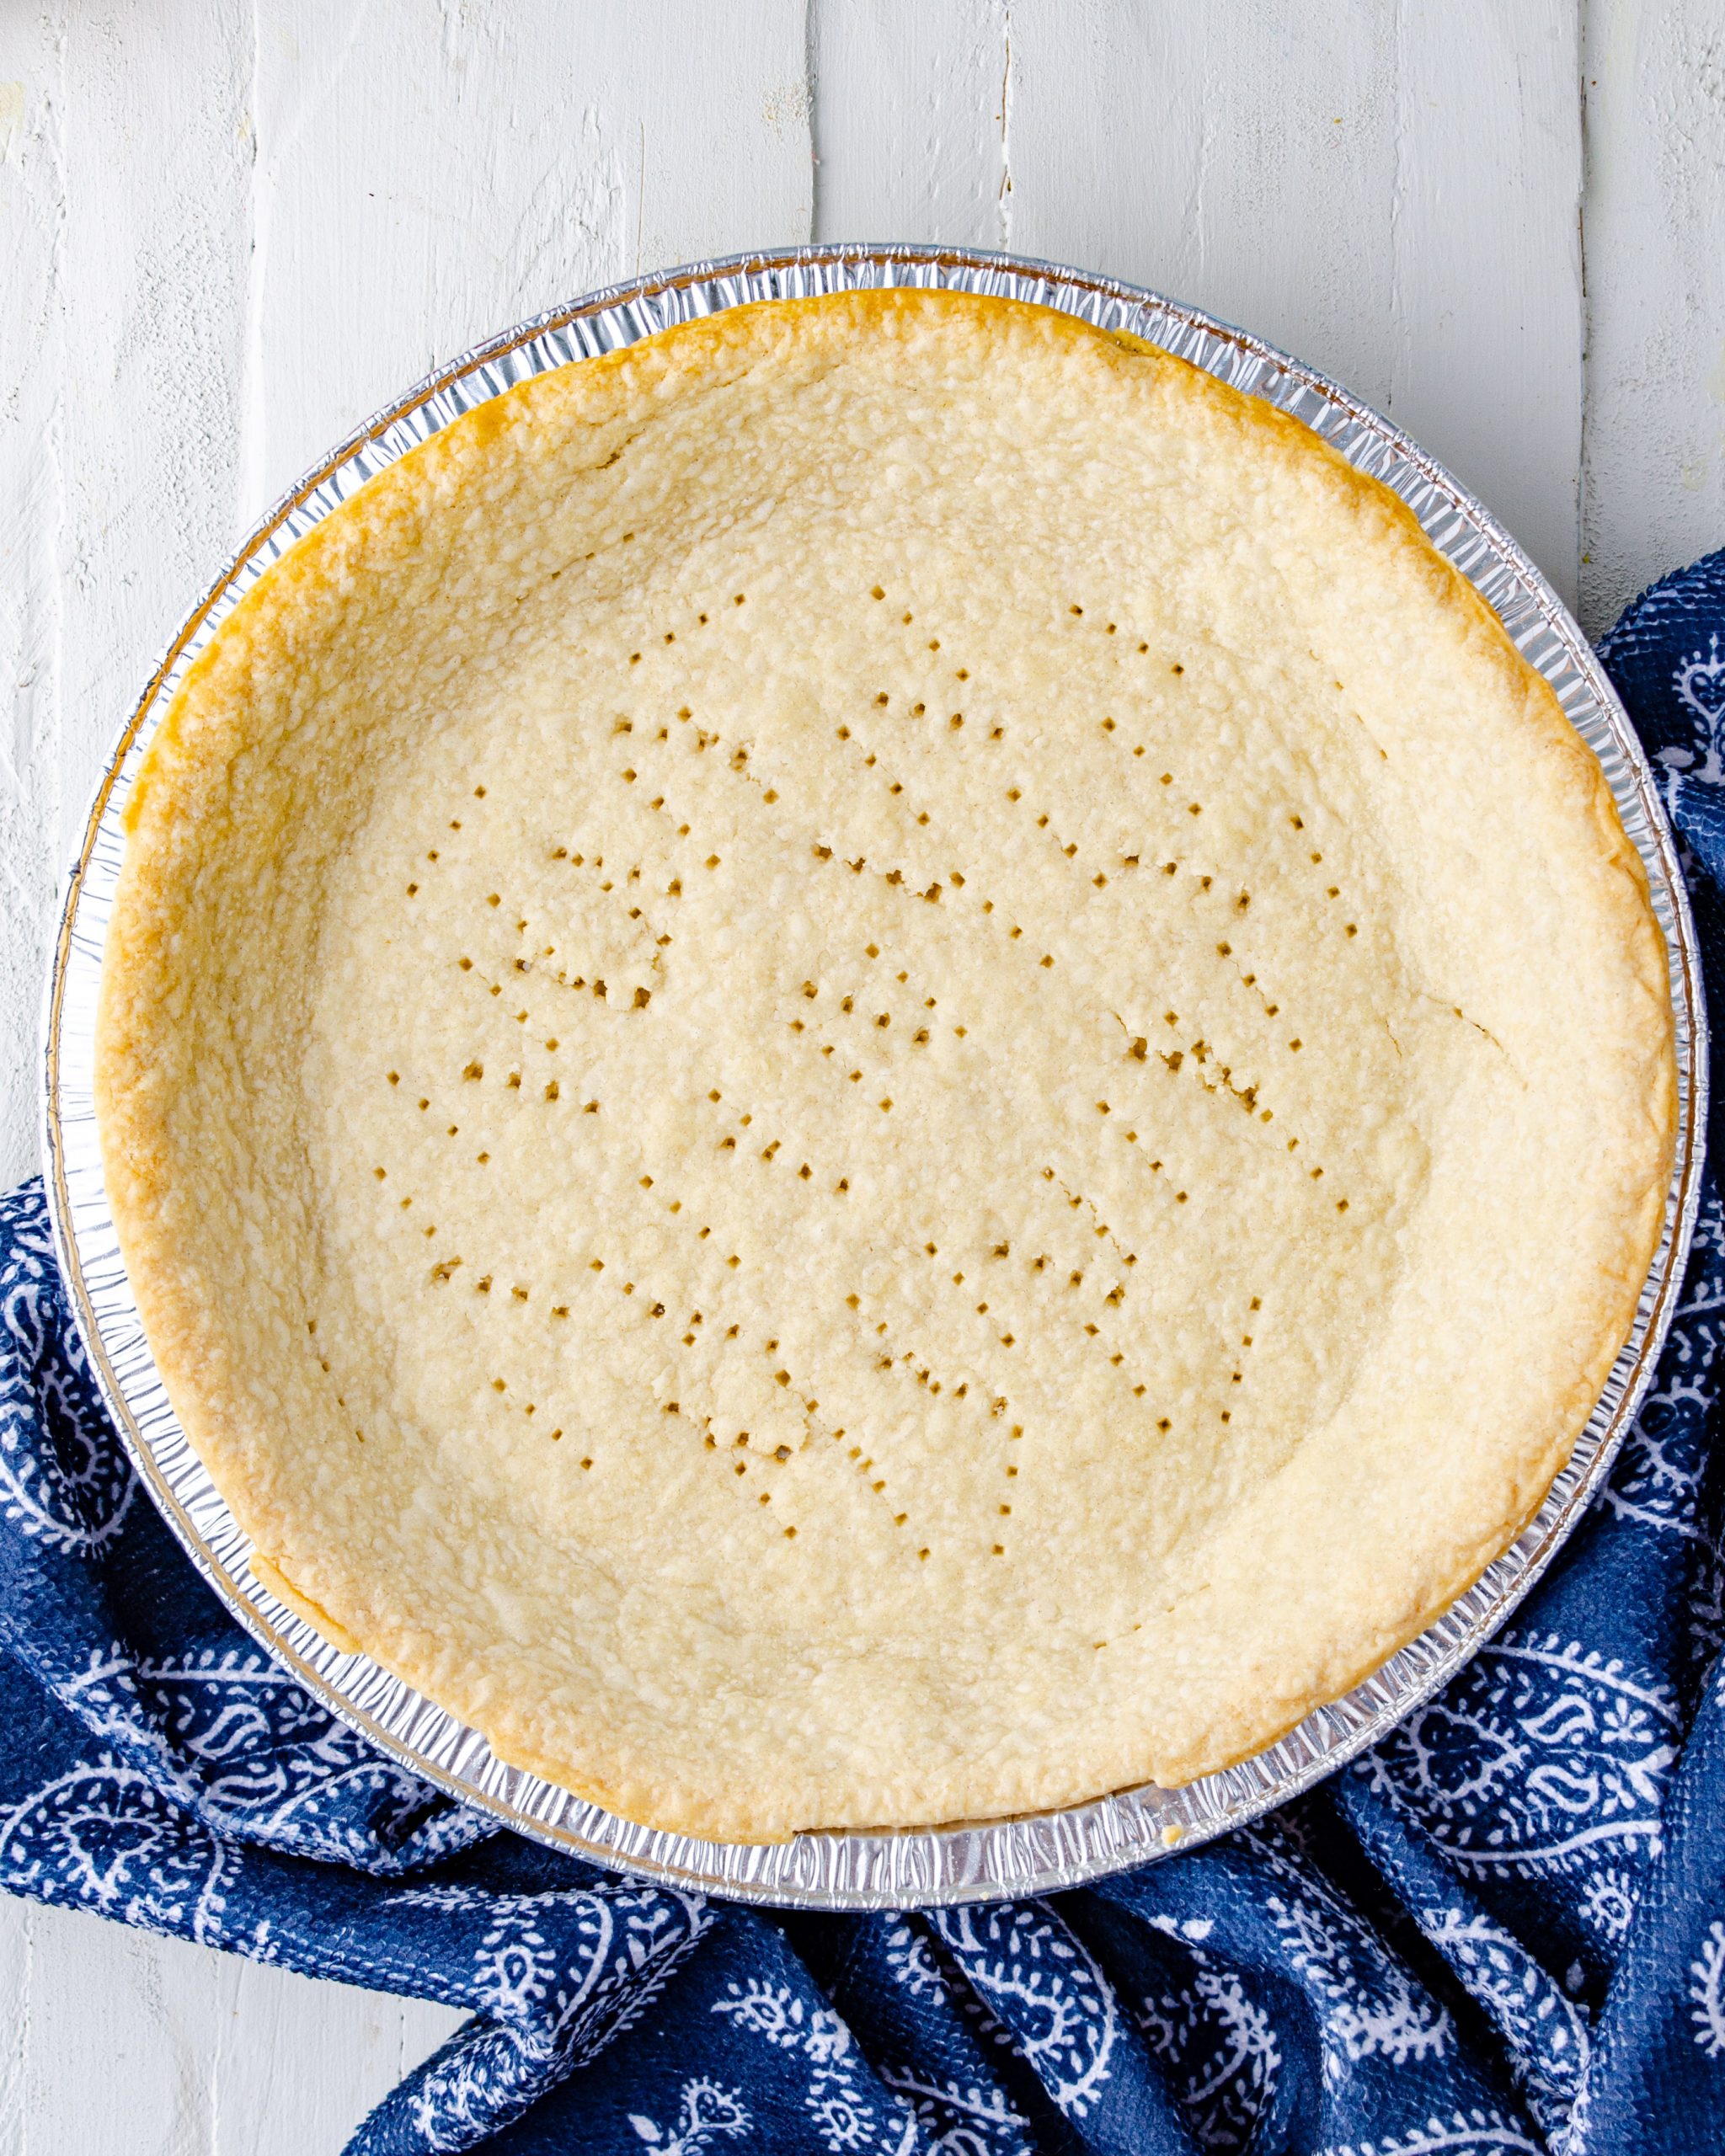 Bake frozen pie crust according to the directions on the package. Remove from oven and allow to cool for 30 minutes.